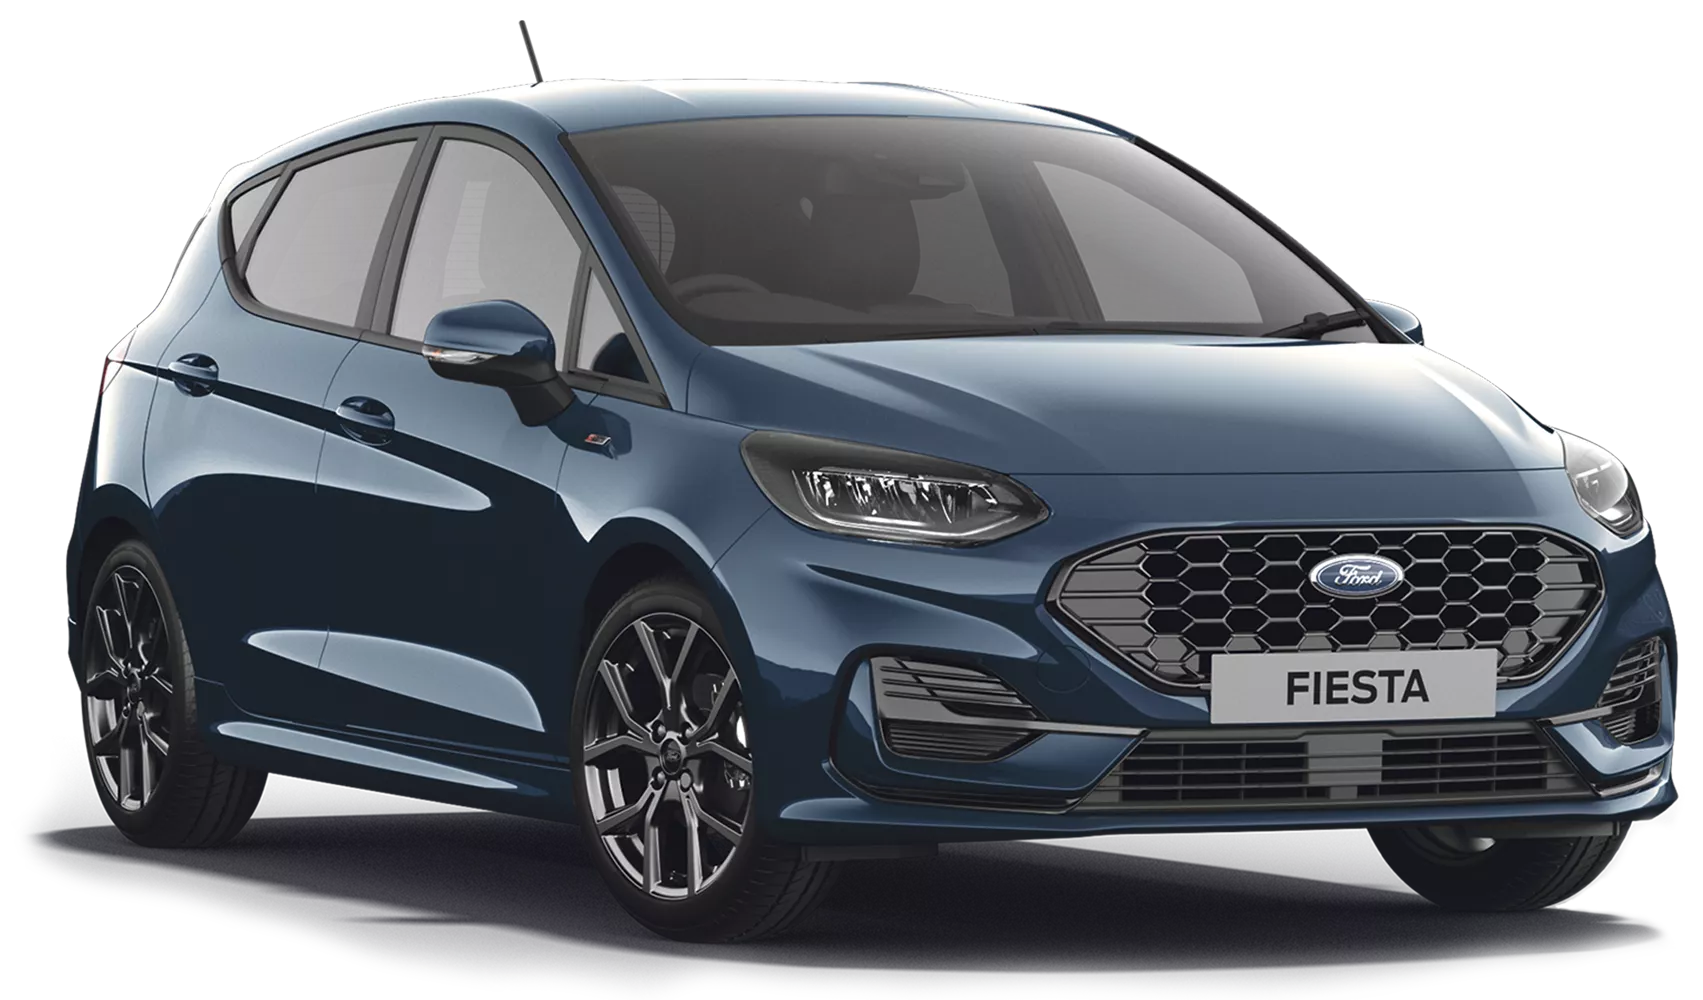 Ford Fiesta 1.0 EcoBoost Hbd mHEV 125 ST-Line X 5dr Auto